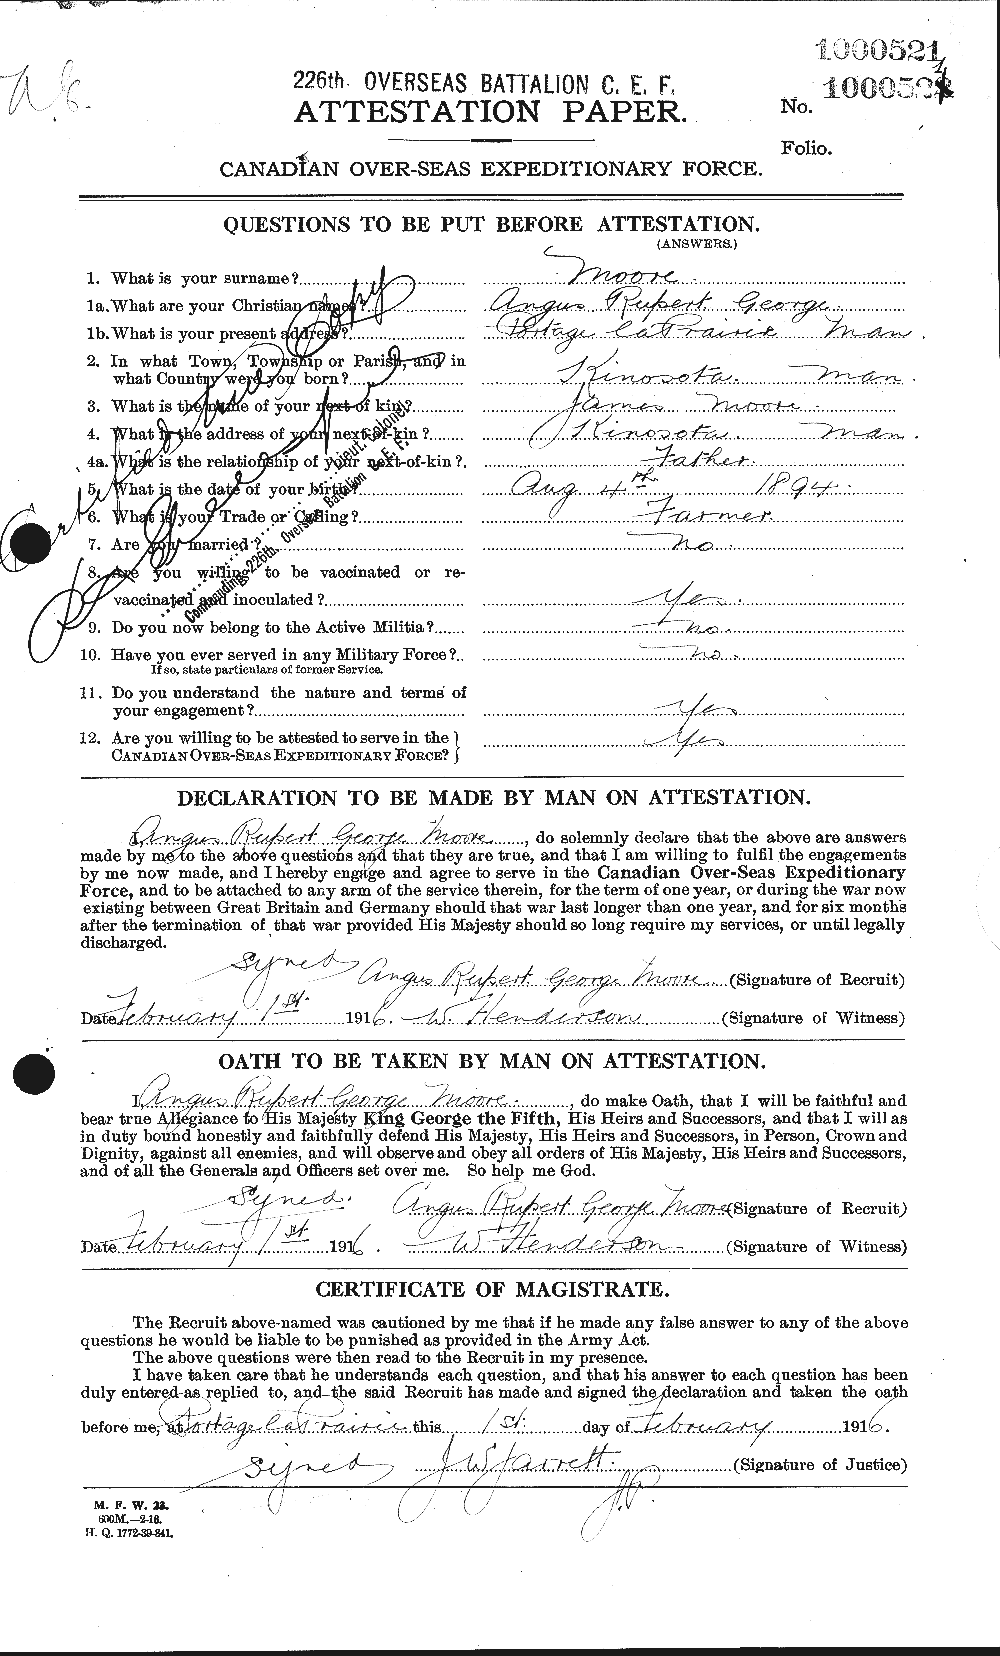 Personnel Records of the First World War - CEF 506632a